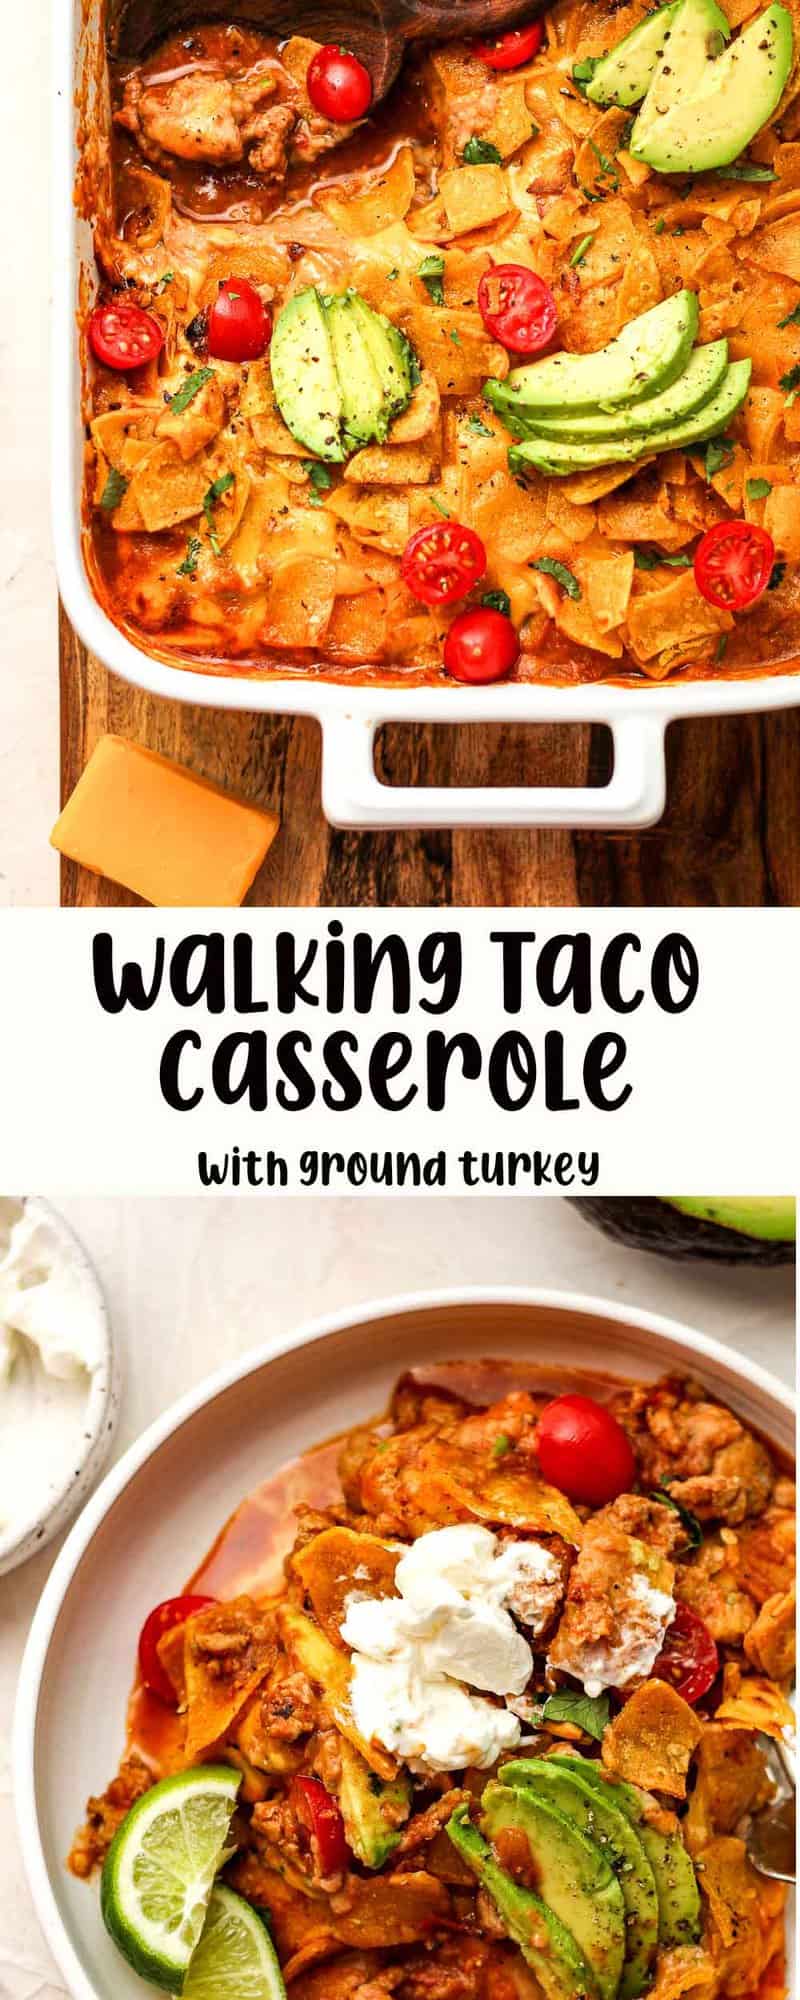 A long pin with the taco casserole and a serving of the casserole.